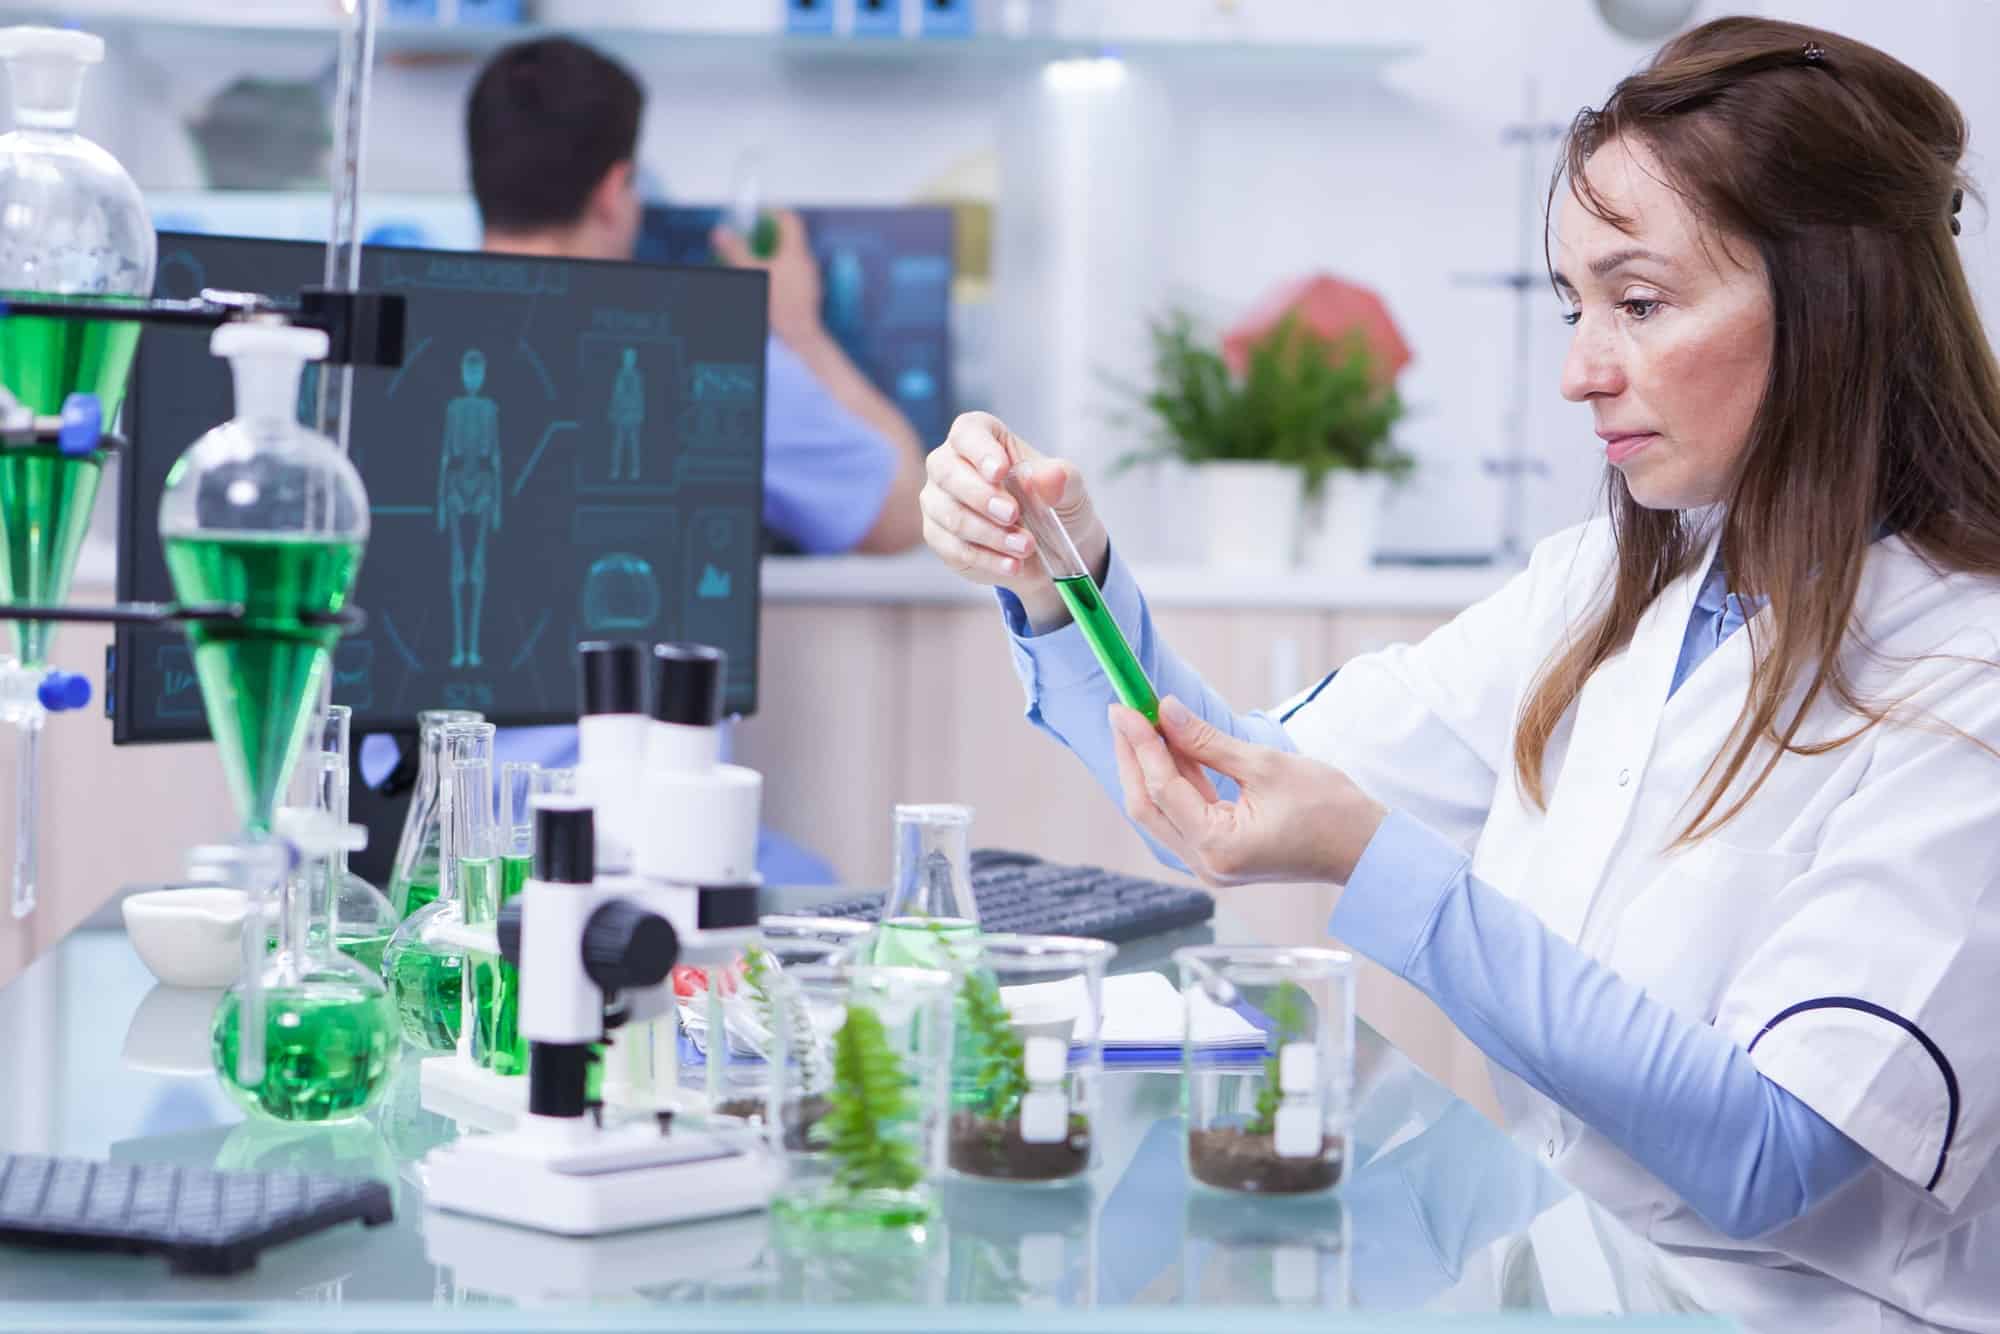 Side view of female scientist doing research on plants holding a green solution in a test tube